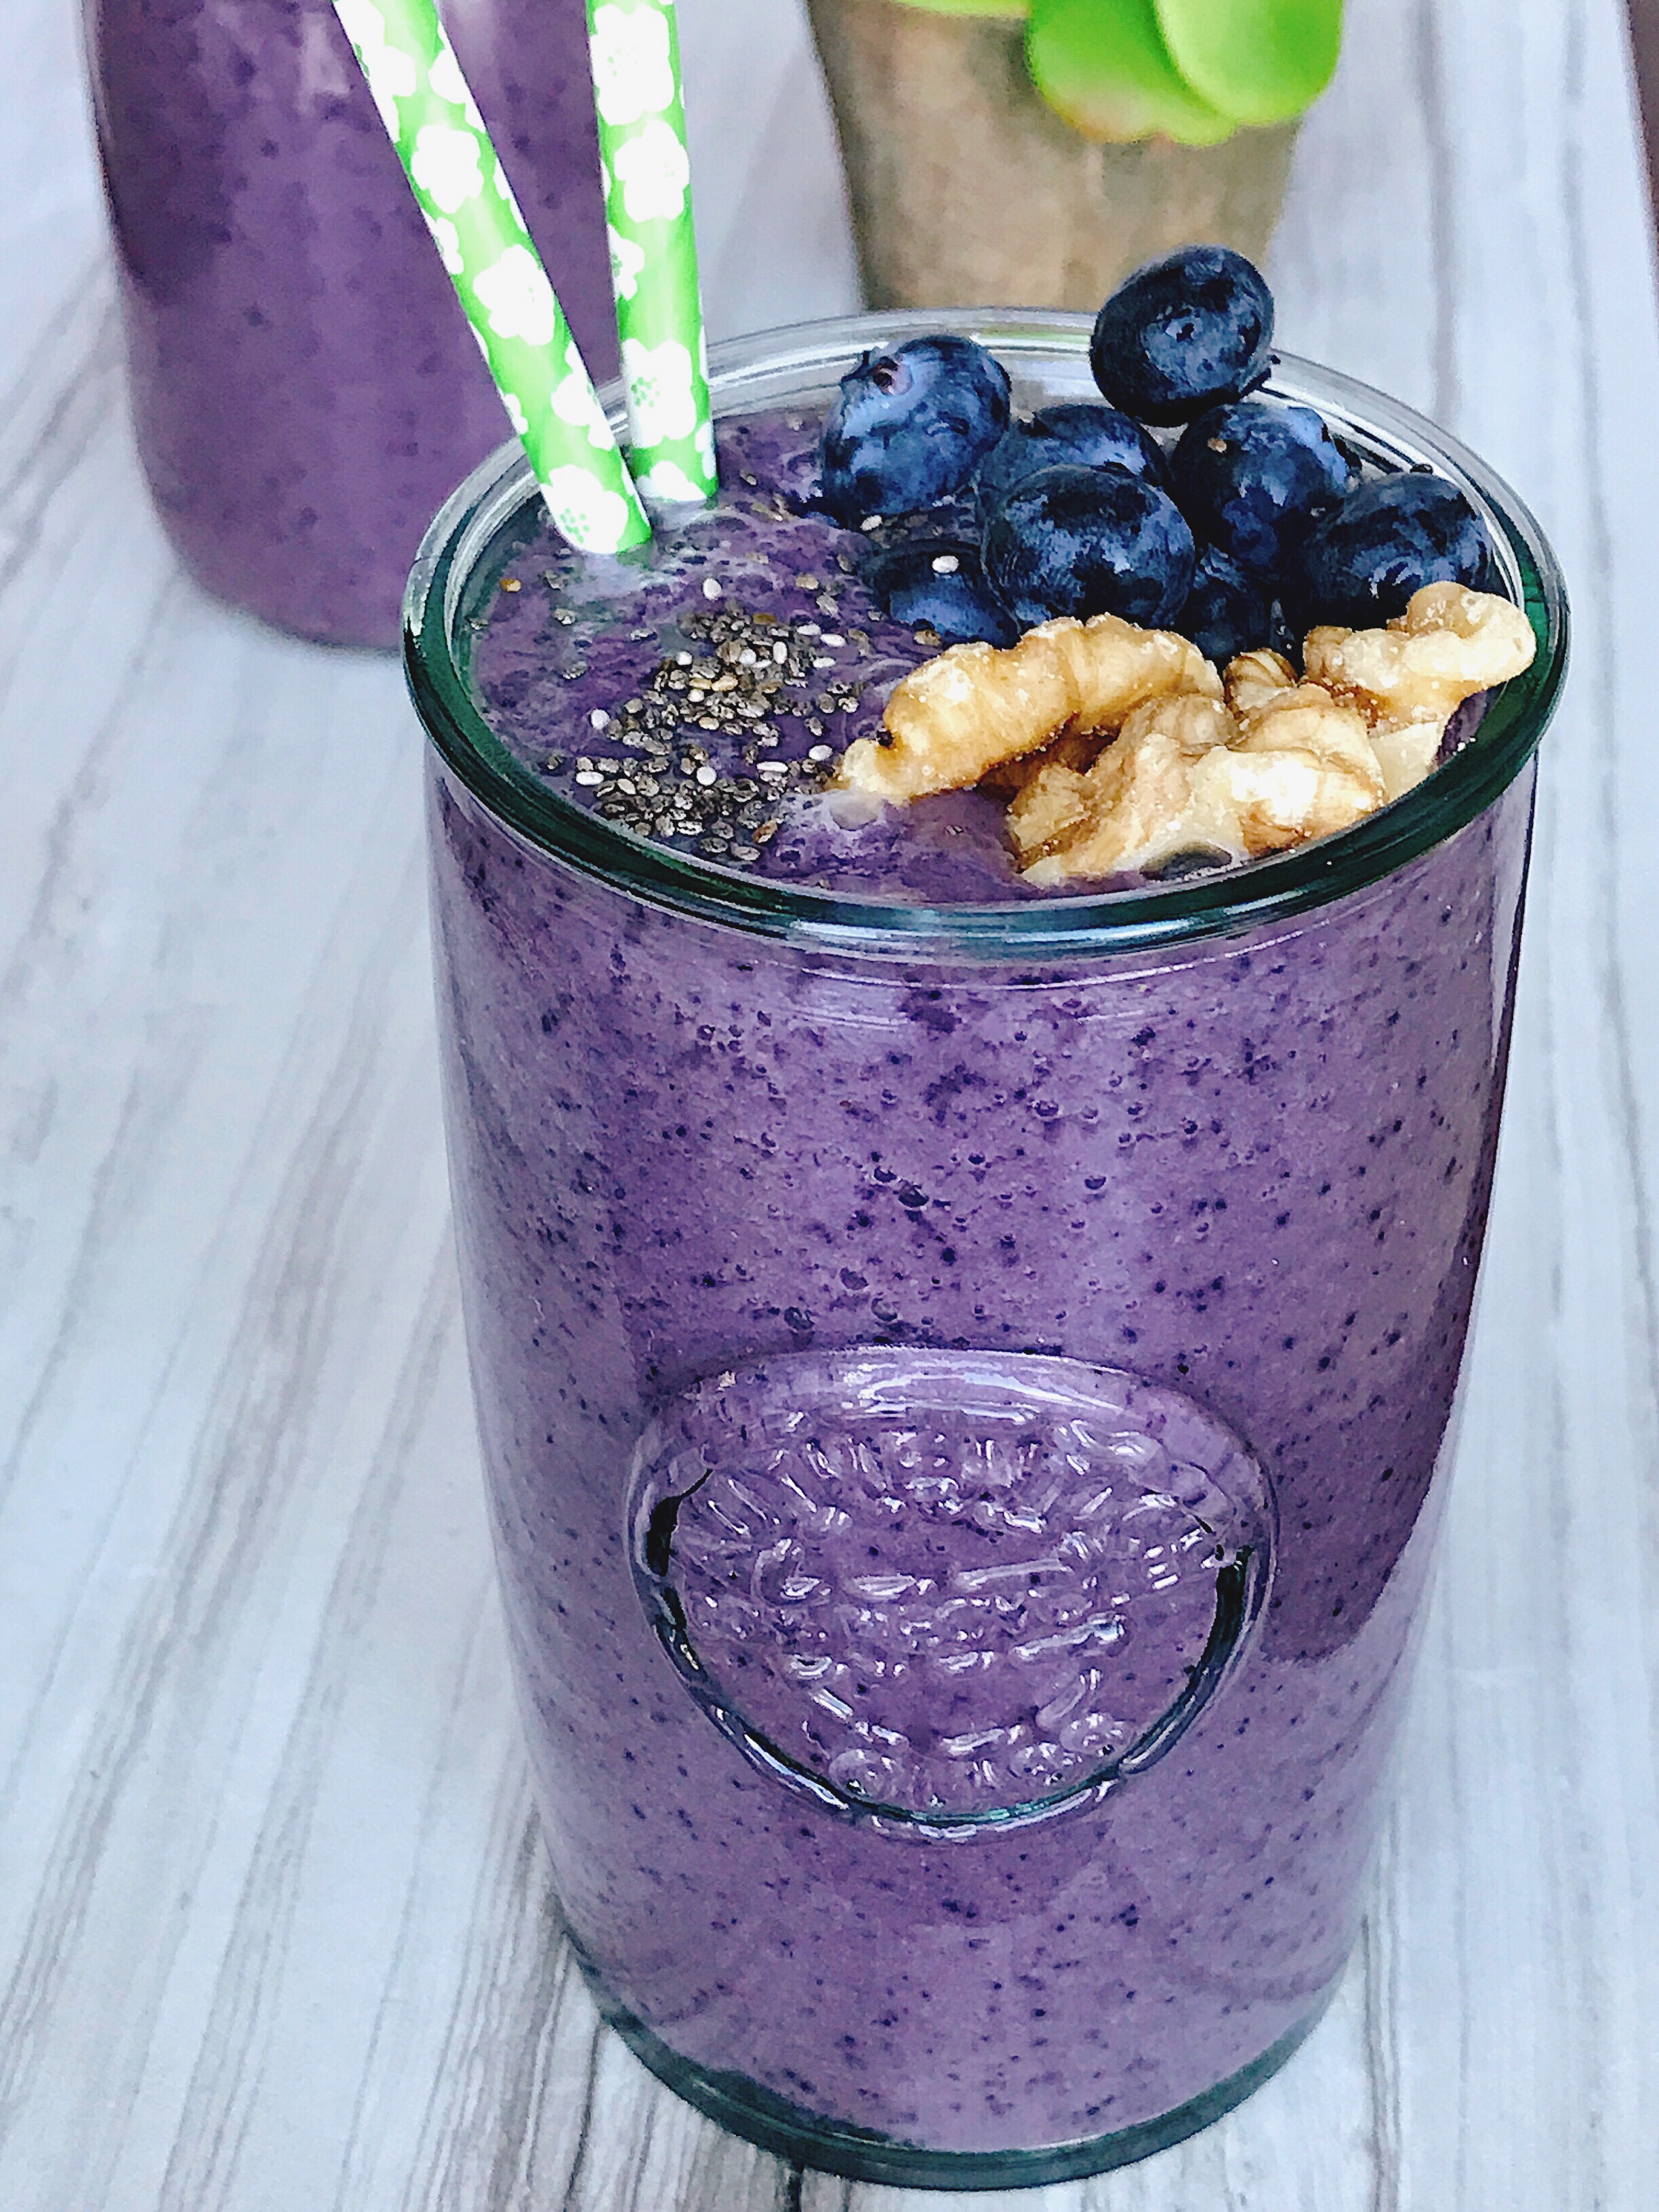 Delicious and healthy blueberry smoothie recipe with walnuts and chia seeds for added health benefits